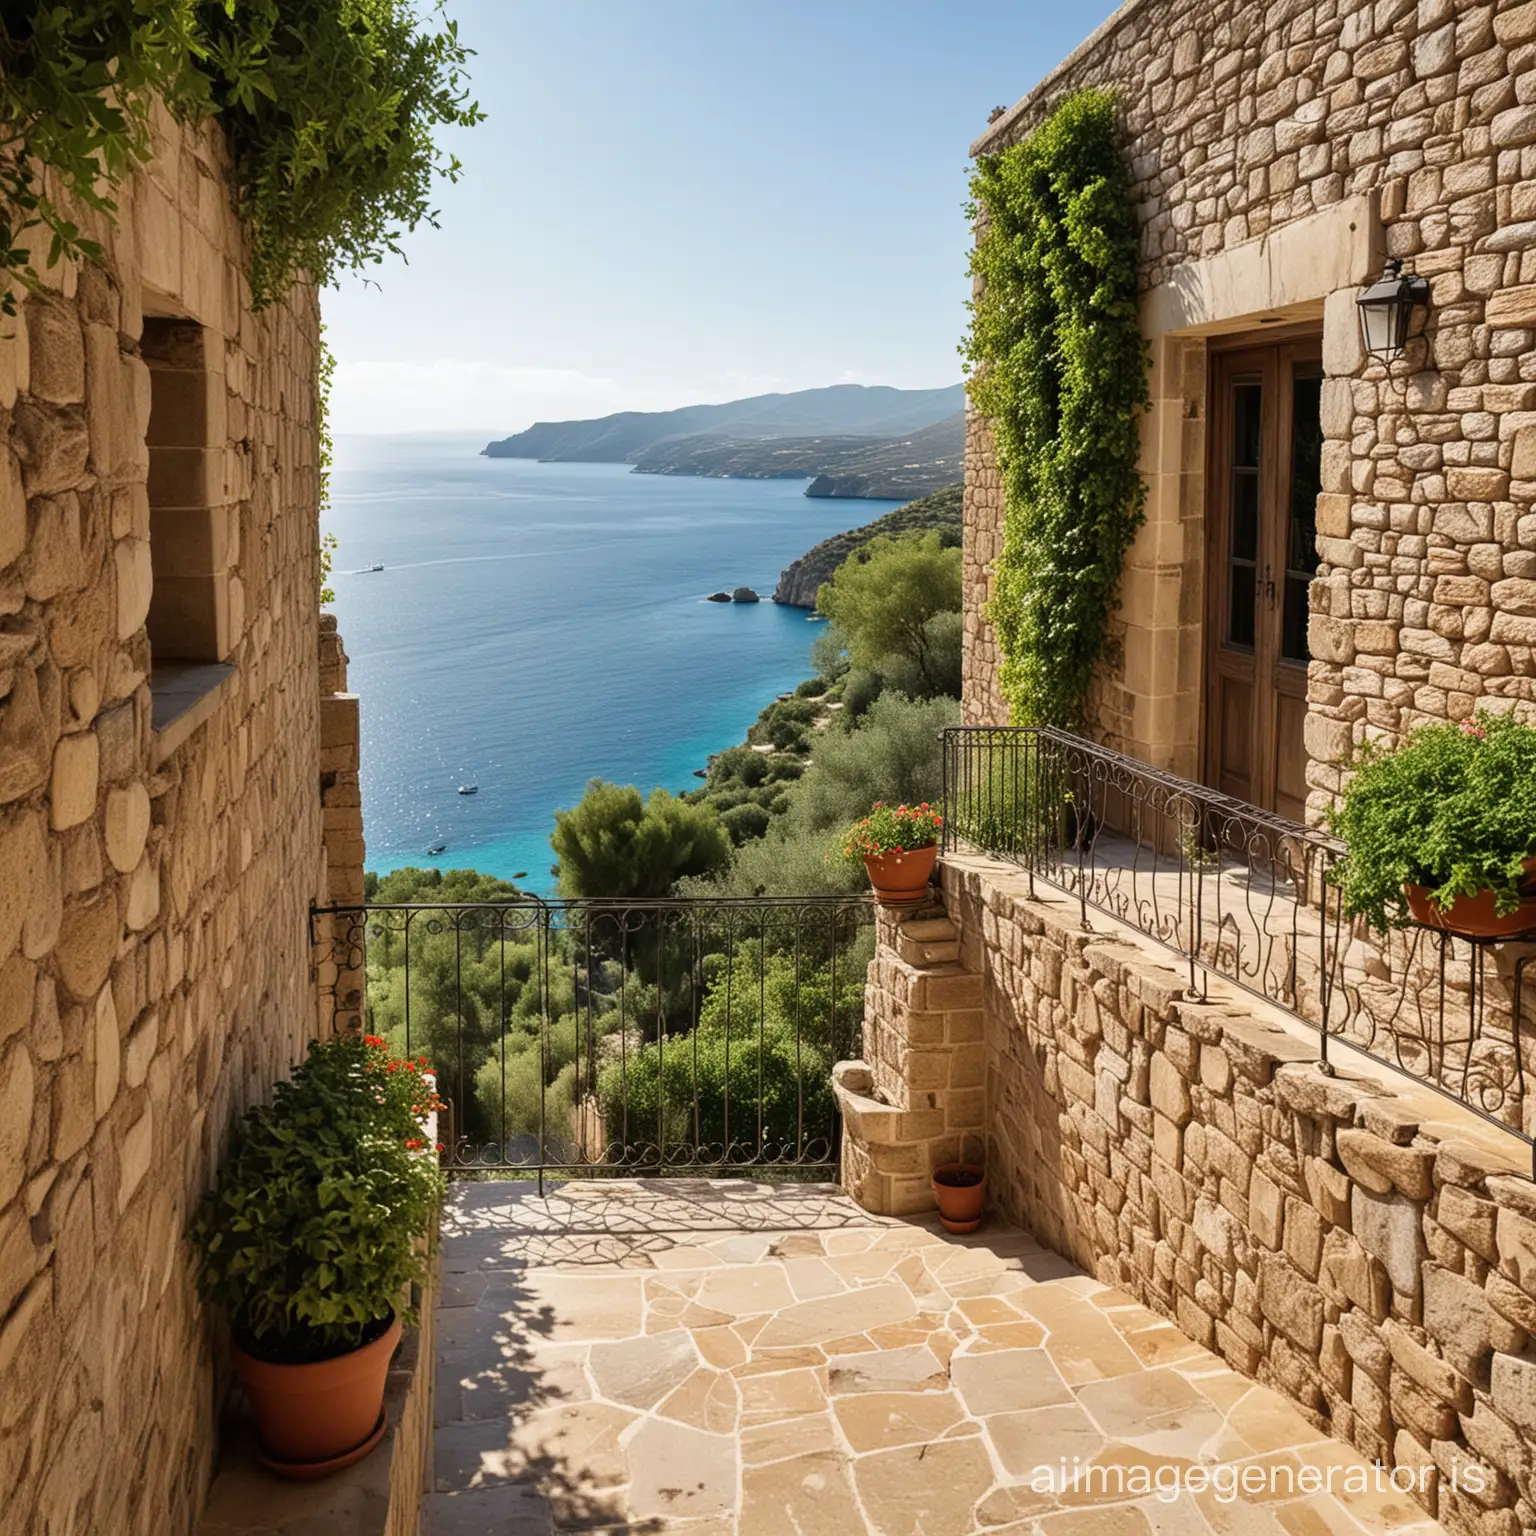 the view from  balcony in a stone tower villa in the mani penisula of greece. a couple are on the balcont faceong away from the camera admiring the view. Vegetation needs to be realistic for mani. Sunlight needs to be realistic for greece in the summer